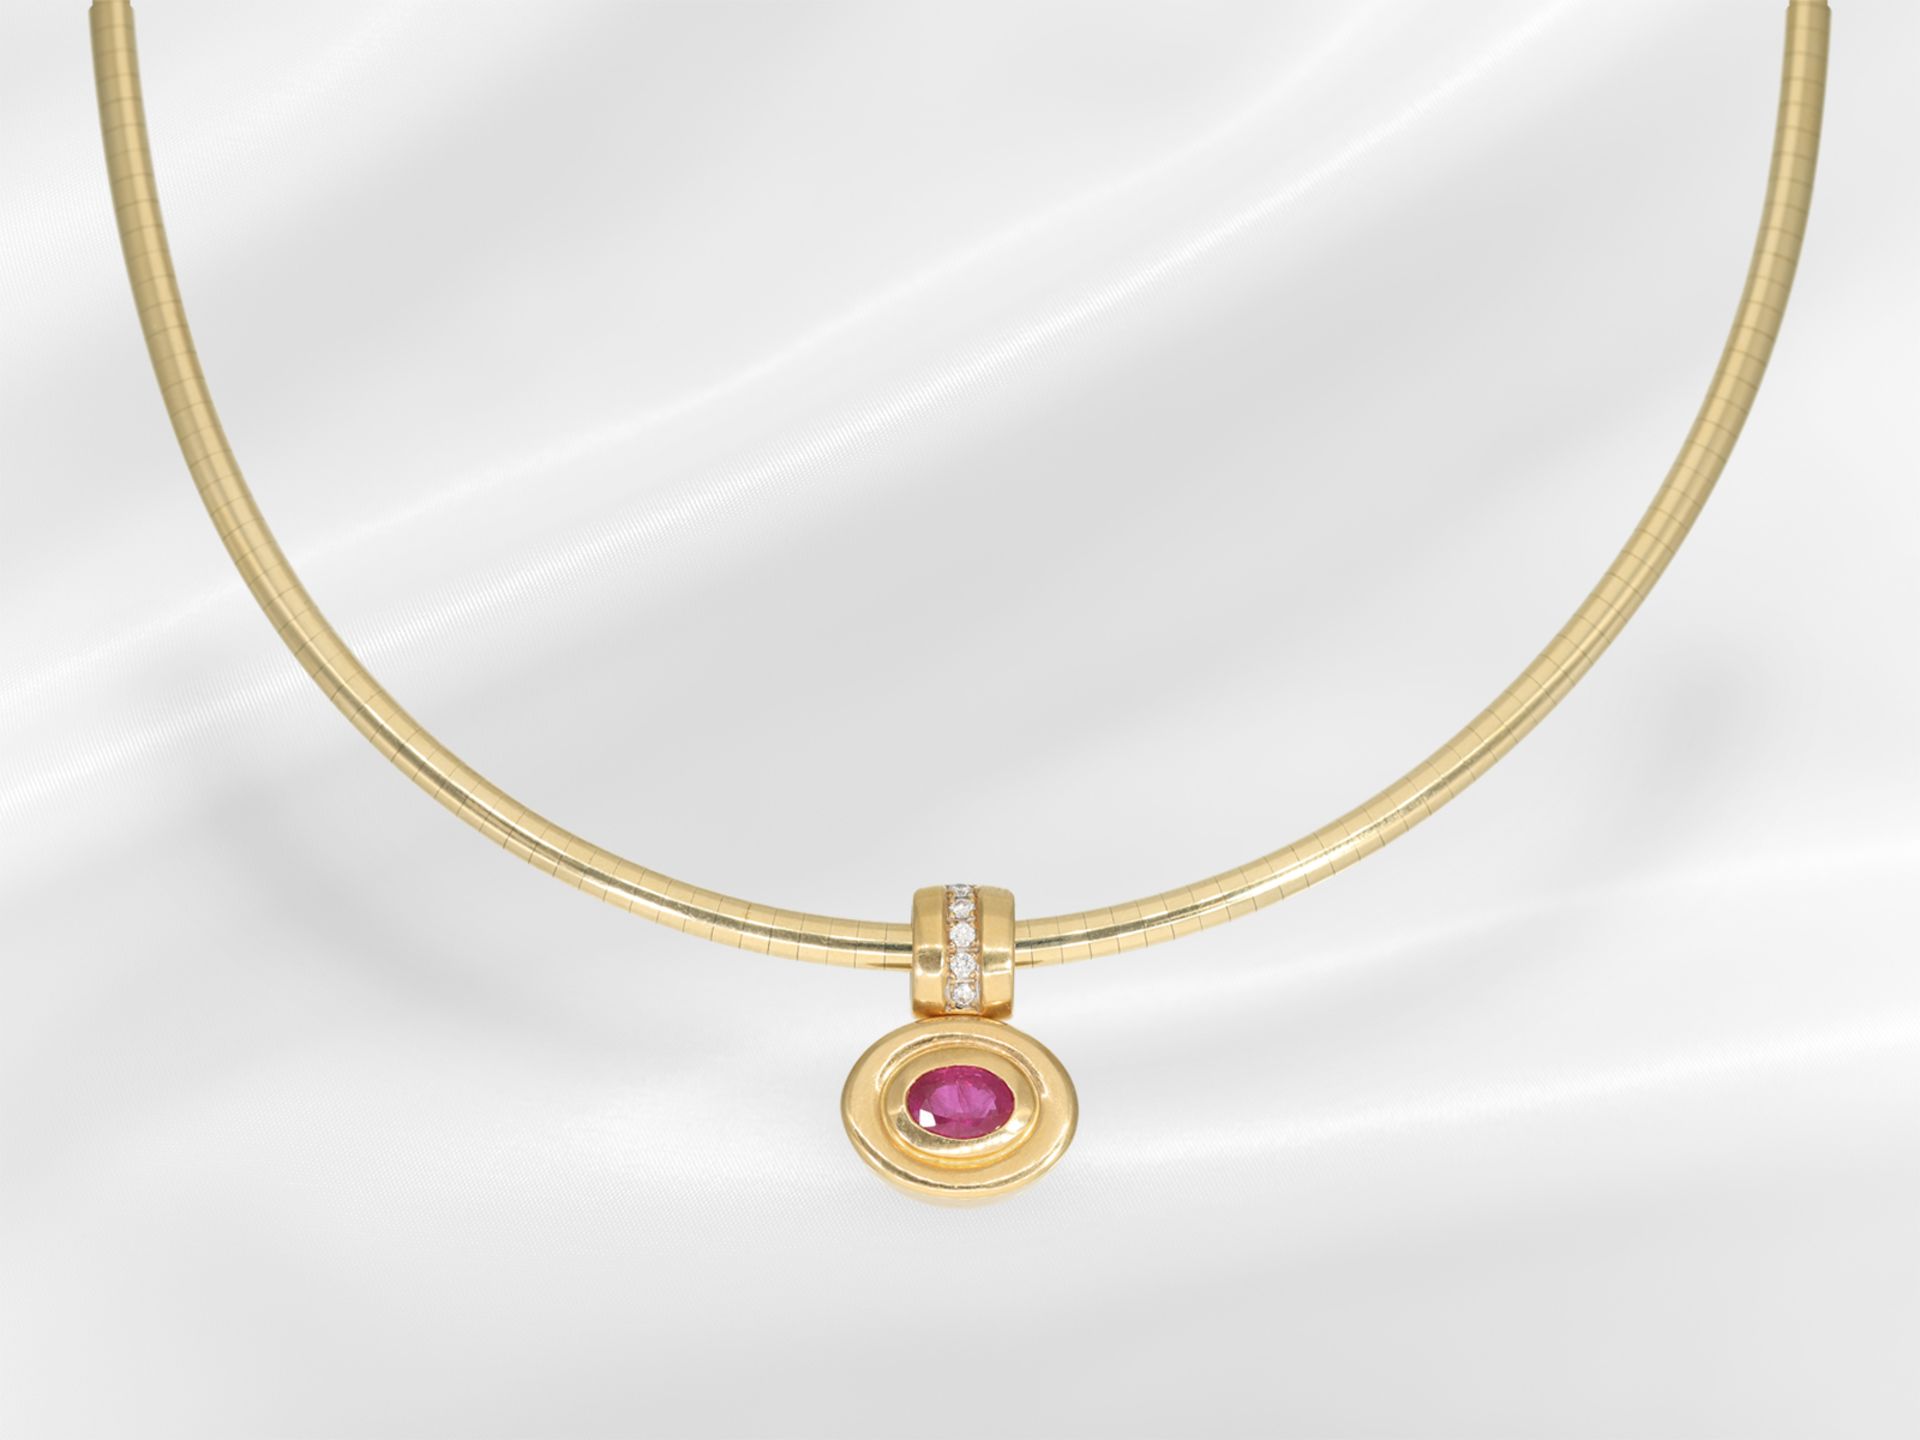 Chain/necklace: attractive vintage omega choker with ruby/brilliant-cut diamond clip, handcrafted fr